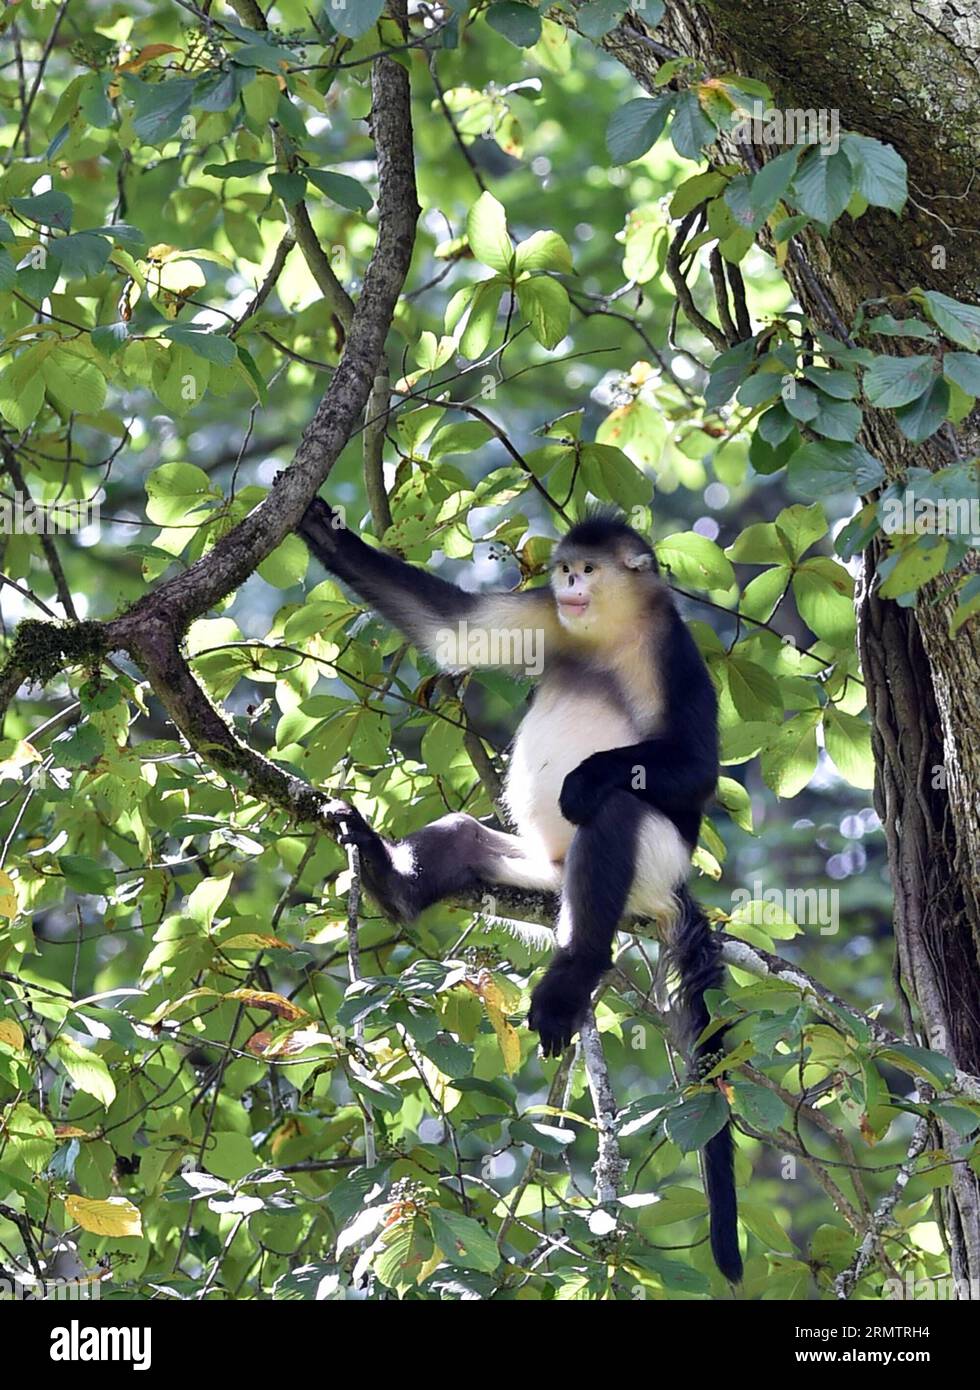 (140917) -- DEQUN,  -- A black snub-nosed monkey (Rhinopithecus bieti) sits on a tree branch in the Baimang Mountain National Natural Reserve in the Tibetan Autonomous Prefecture of Deqen in southwest China s Yunnan Province, Sept. 16, 2014. The population of black snub-nosed monkeys within the Baimang Mountain National Natural Reserve has expanded by about 50 as of September. In August 2013, a 5.1-magnitude earthquake in Deqen had exerted adverse effects to the habitats of black snub-nosed monkeys here. Their living environments have been restored under protective efforts that lasted for 12 m Stock Photo